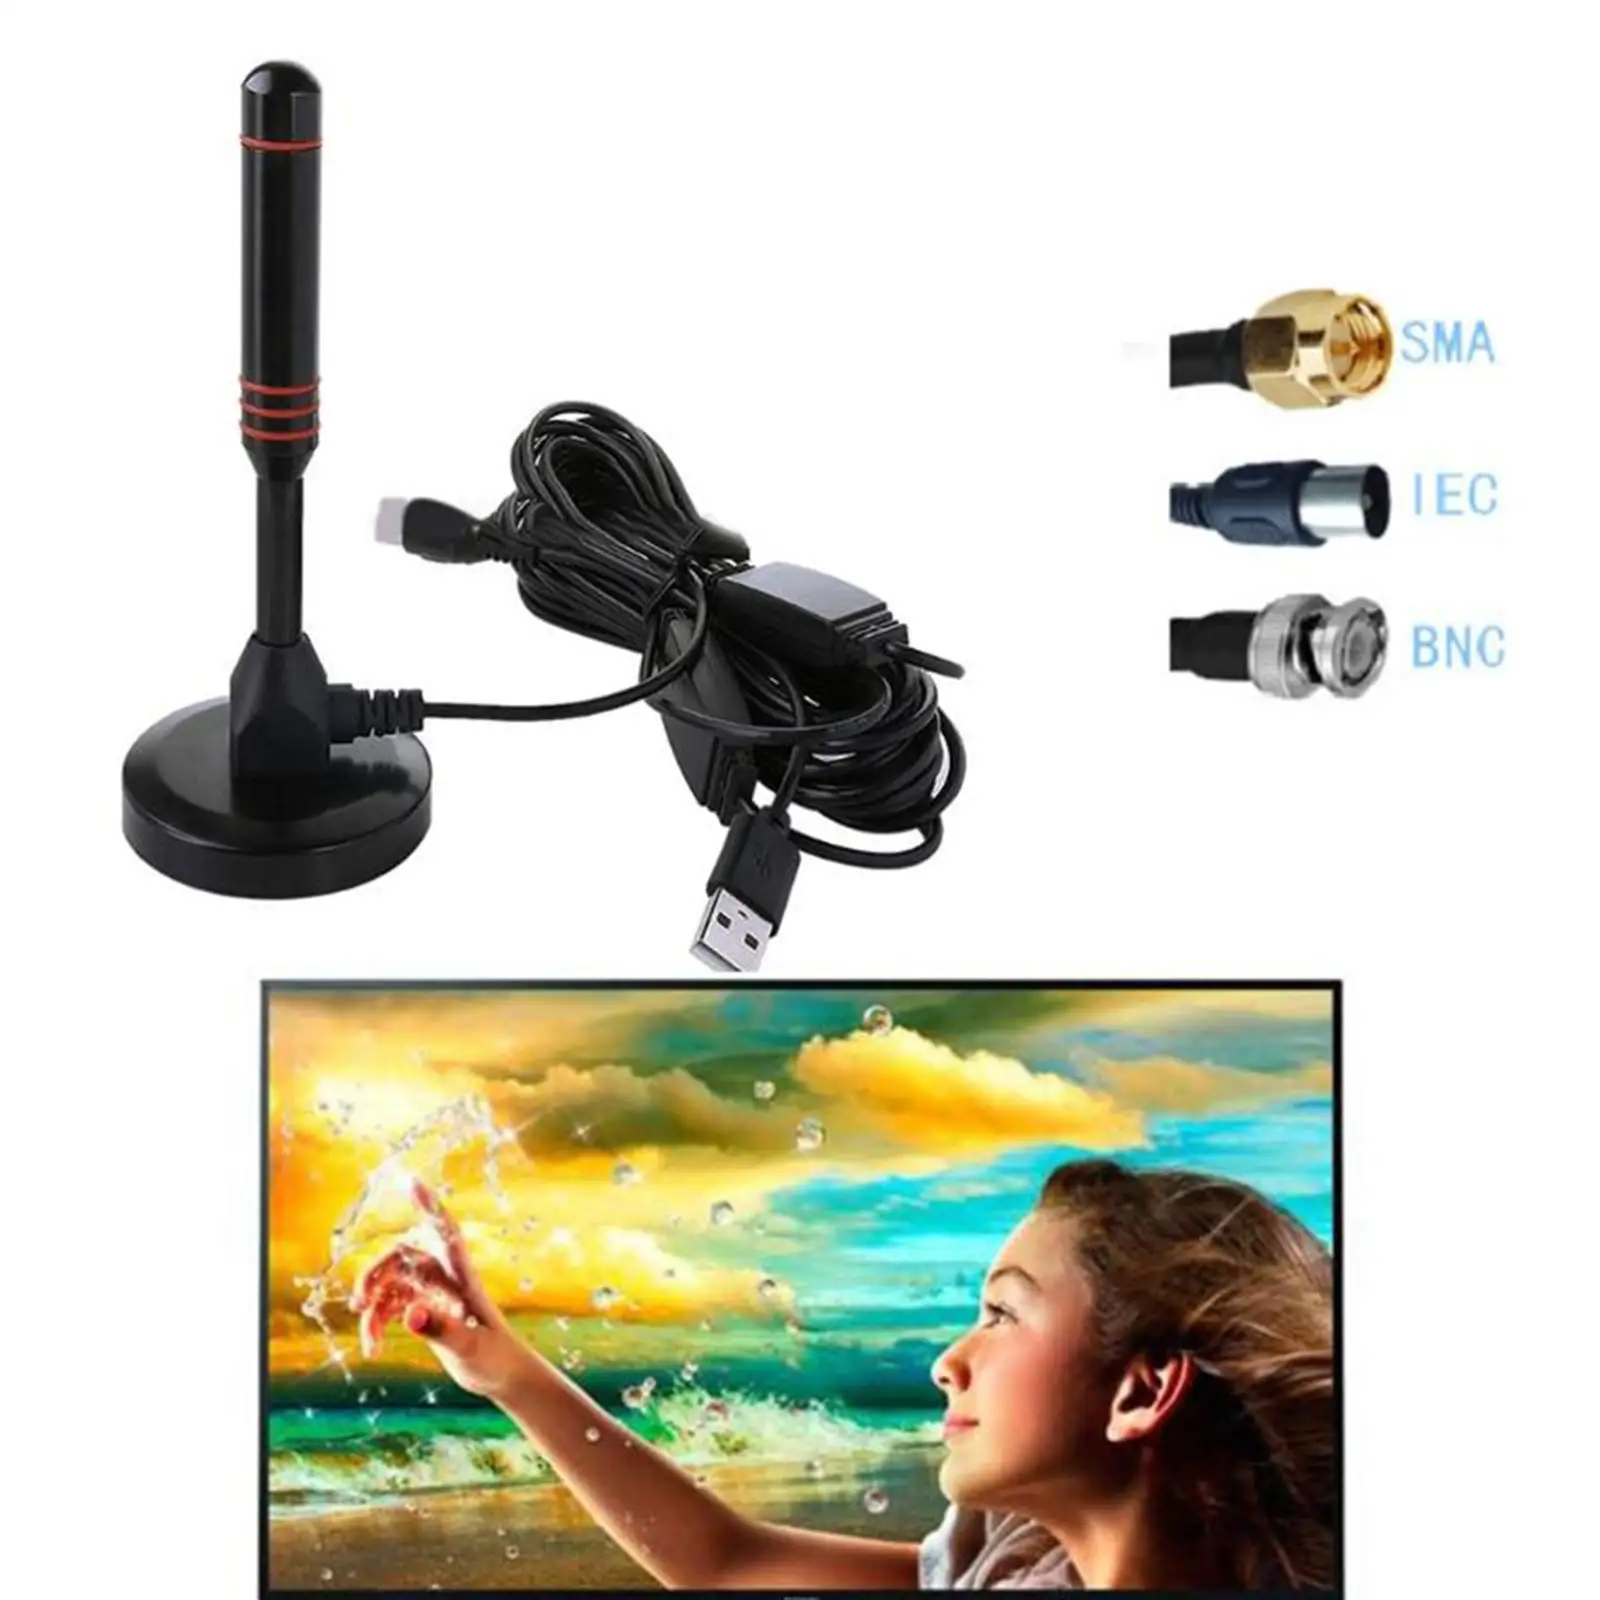  , Indoor Digital TV  with Amplifier  Up to 300 Miles Range, Support 1080P VHF